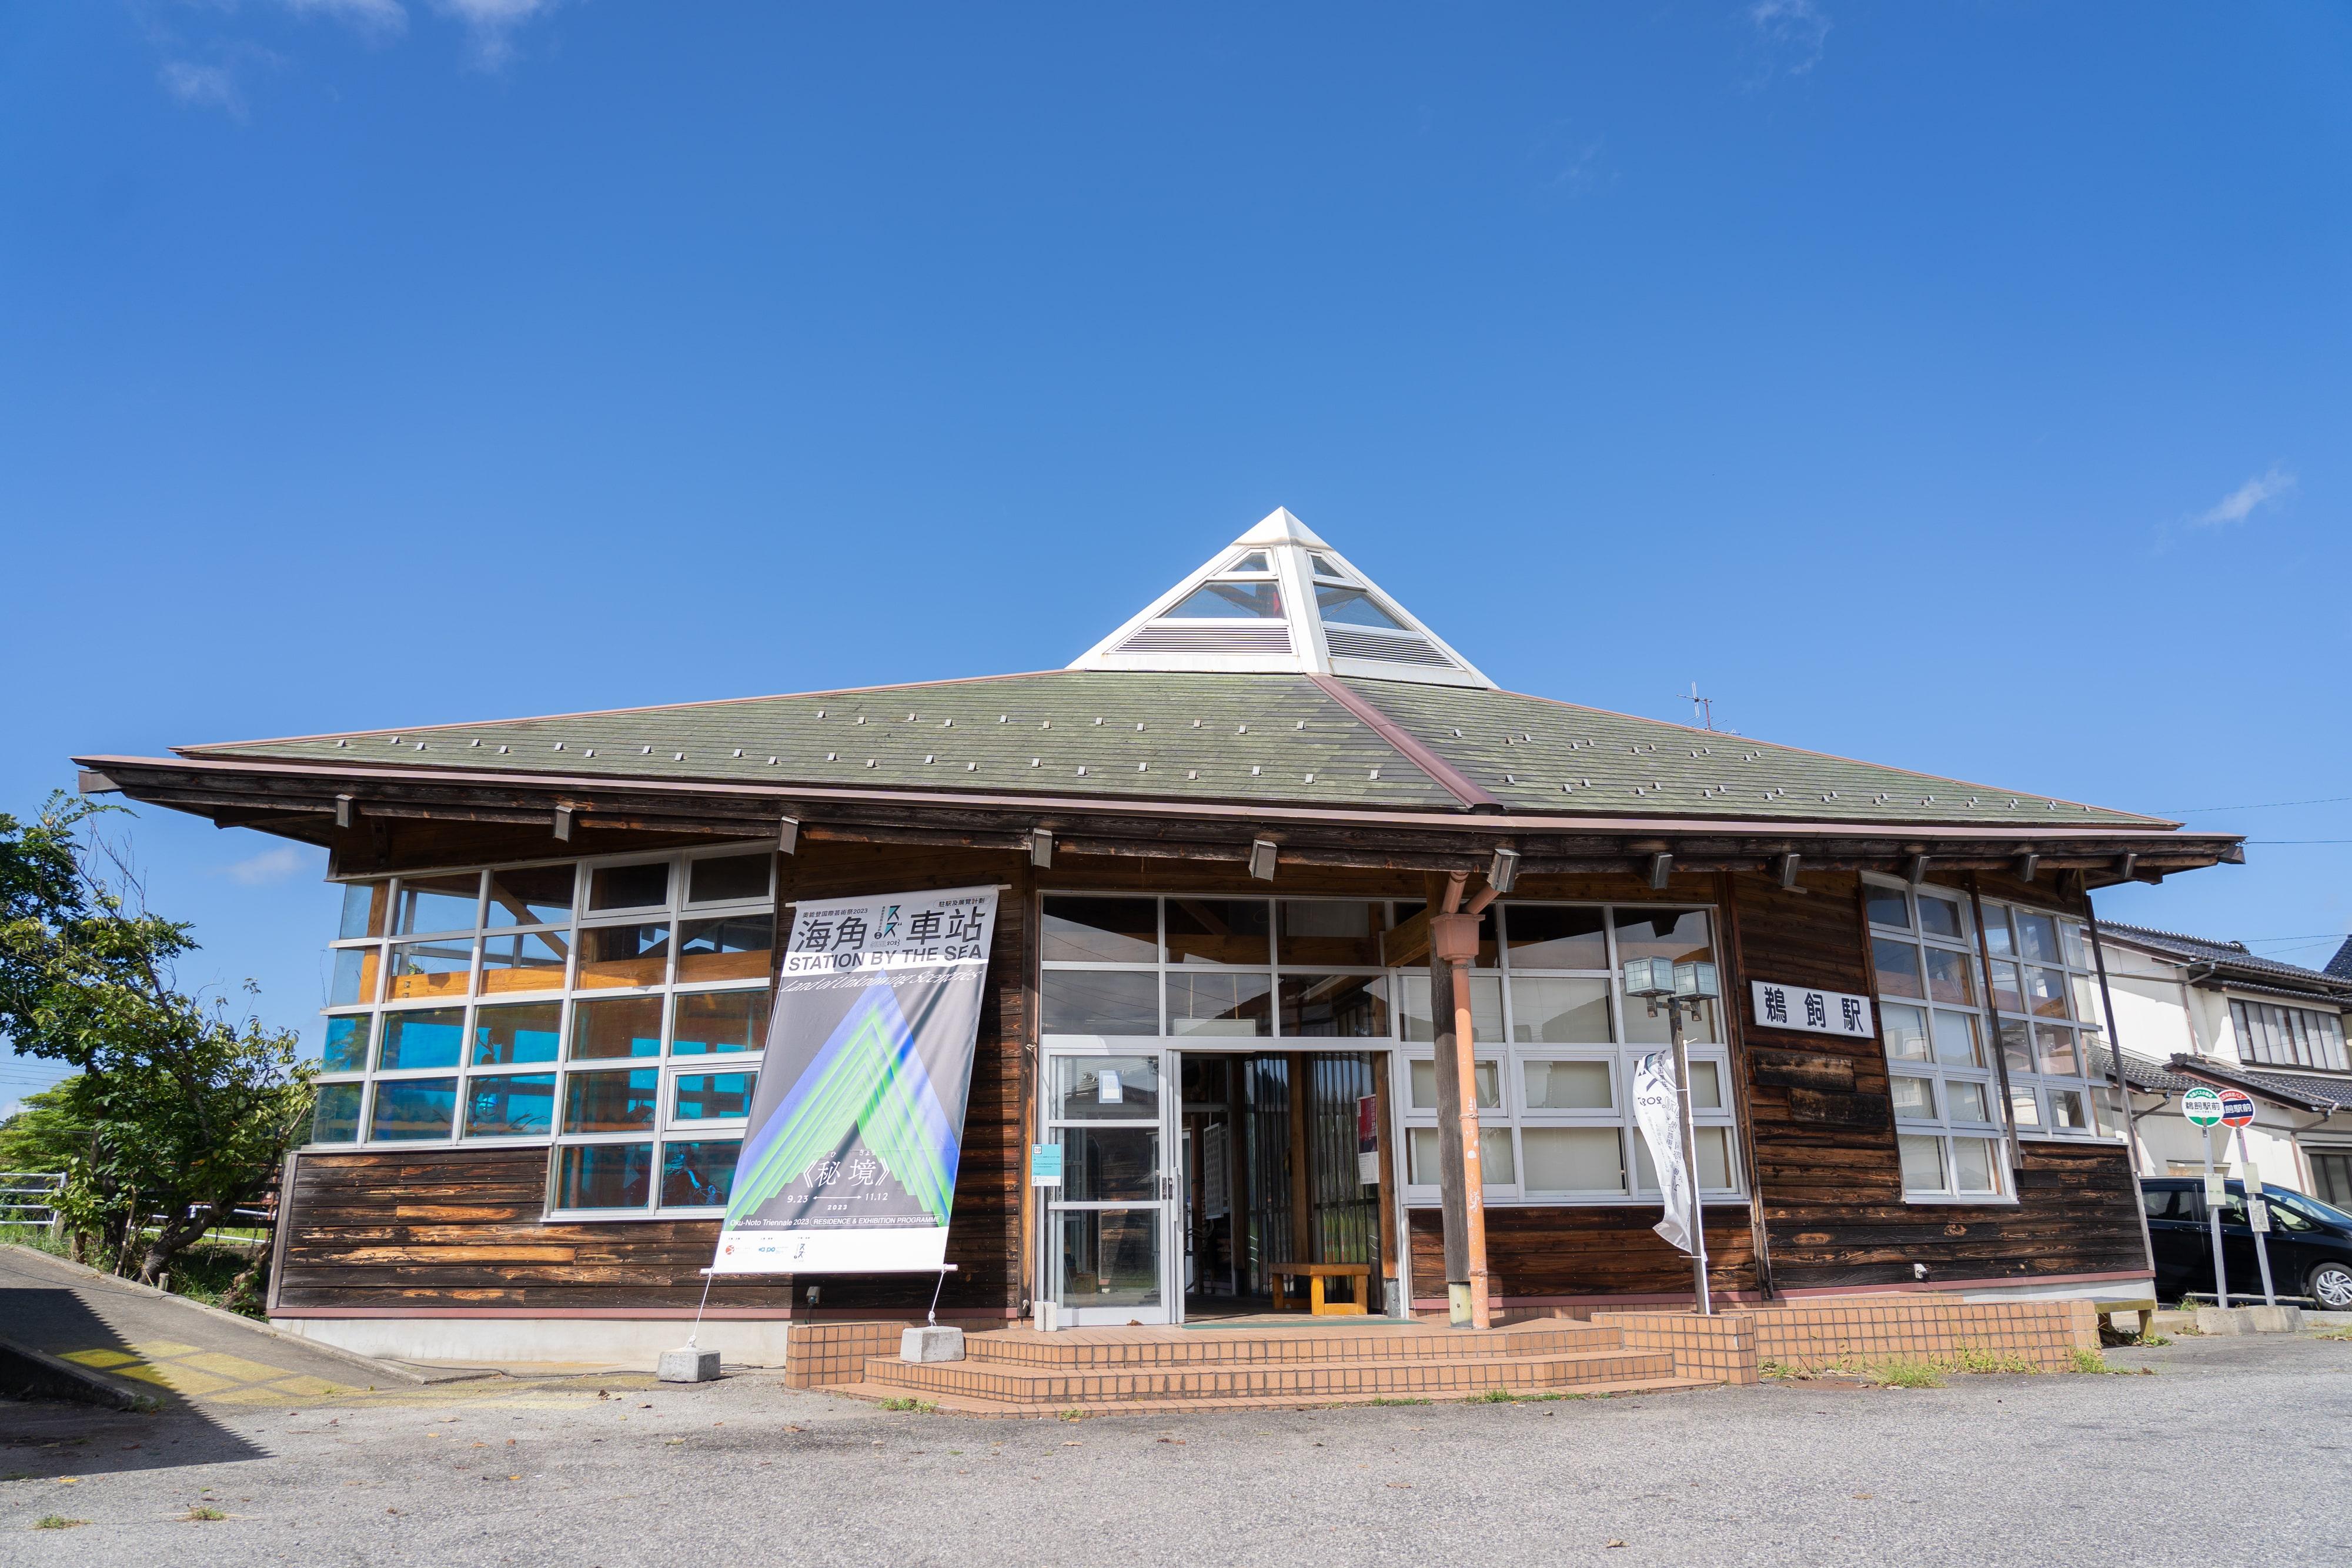 Station by the Sea at Oku-Noto Triennale 2023 - Residence and Exhibition Programme is now being held until November 12 at the former Ukai Station in the city of Suzu on the Noto Peninsula. Photo shows the exterior of the former Ukai Station.